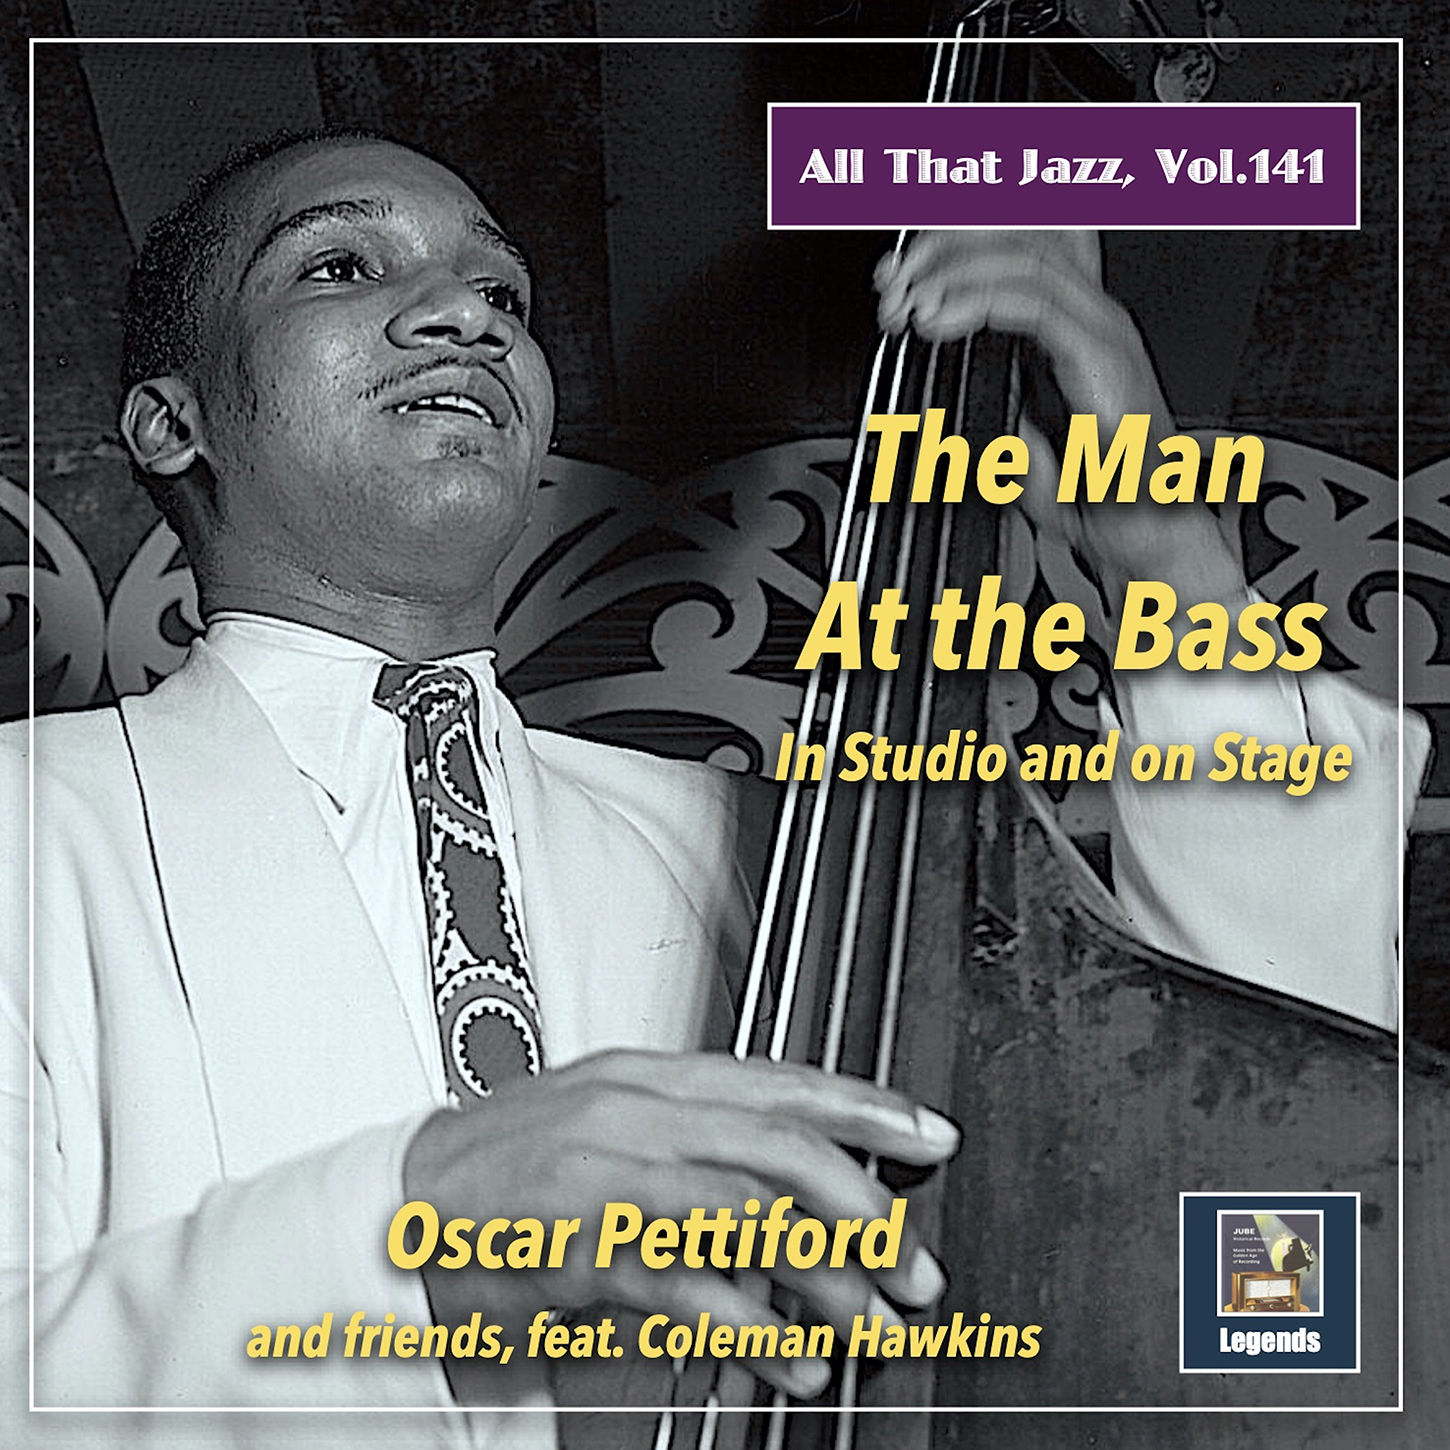 Oscar Pettiford Quartet – All That Jazz Vol. 141: The Man at the Bass in Studio and on Stage (2021) [FLAC 24bit/48kHz]